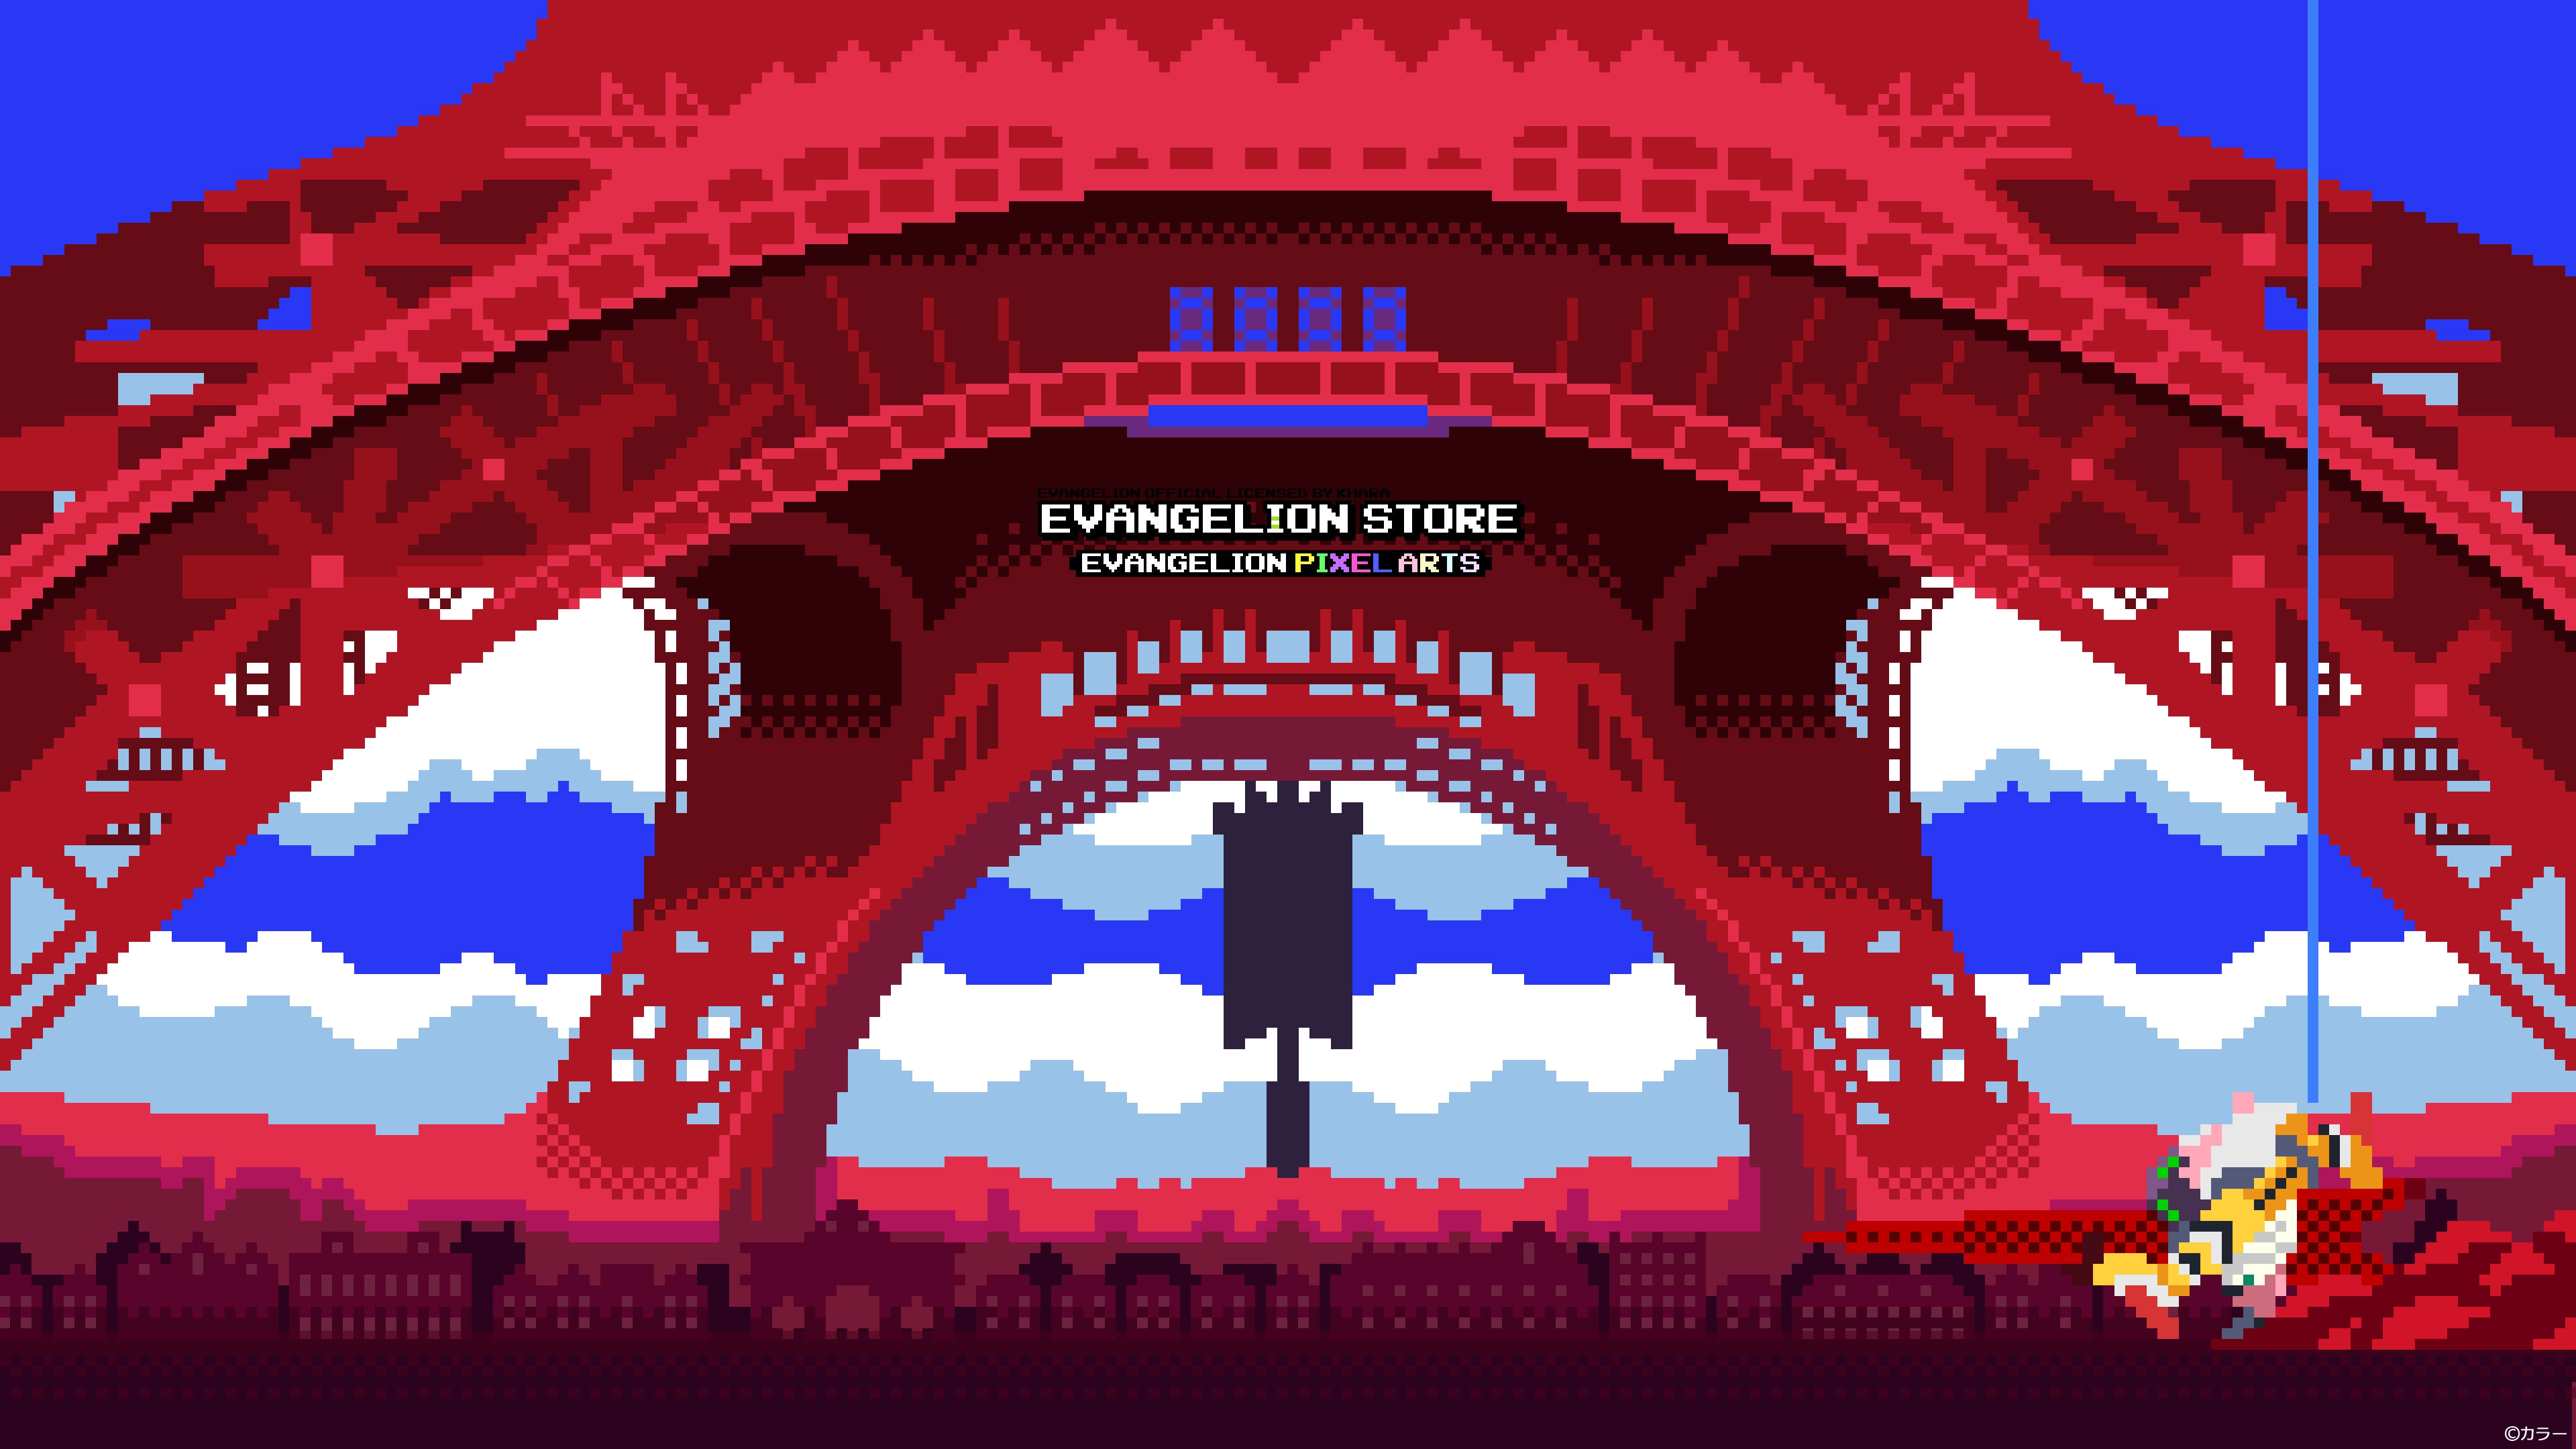 EVA STORE released 3 very cool pixel art wallpaper inspired by the first 10 minutes of Evangelion:3.0 1.0